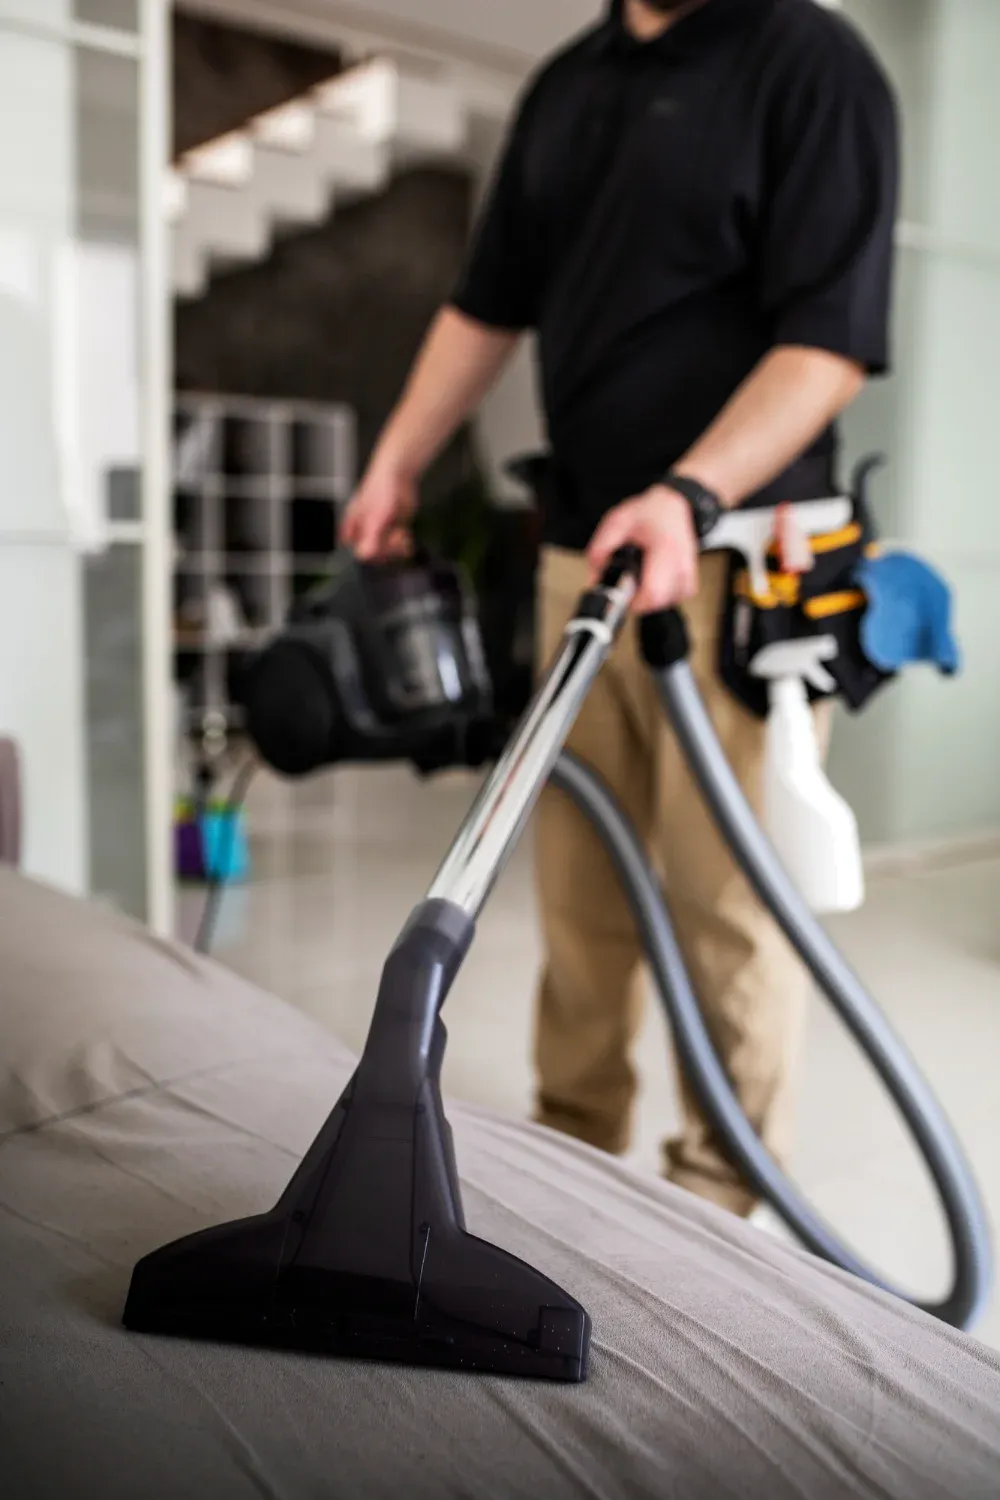 PROFESSIONAL UPHOLSTERY CLEANING SERVICE IN DELTA, BC